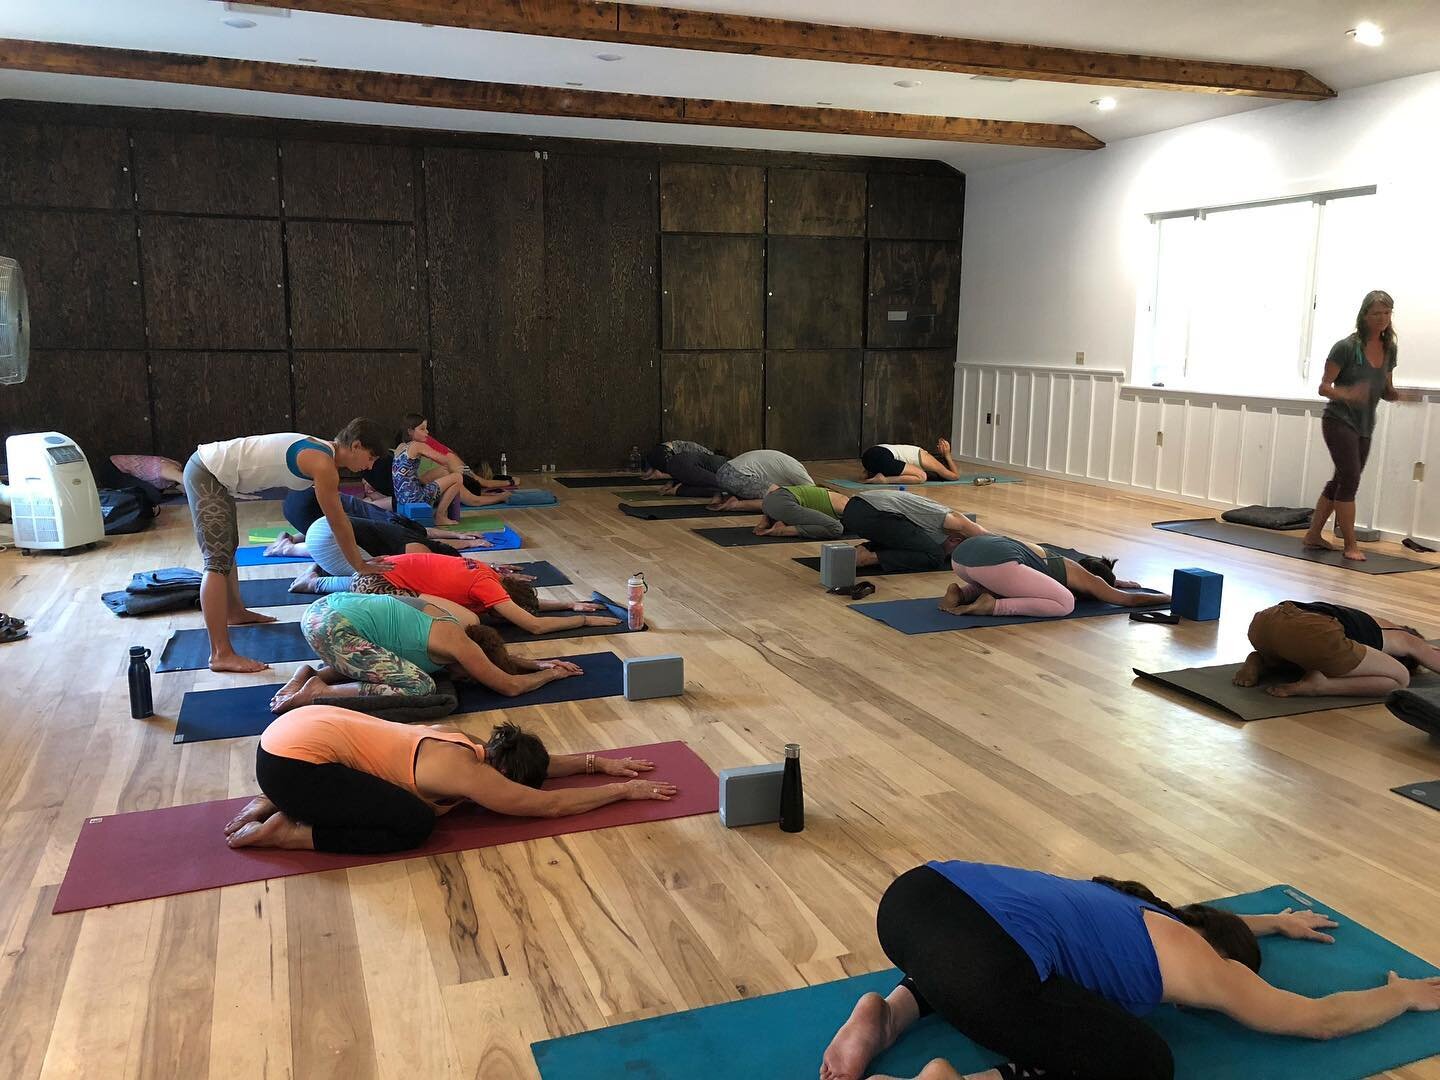 Community Yoga tonight! 😍

Two chances to practice yoga this evening in community:

⏰ 6pm - 7:15pm

📍El Portal Community Hall with @kyra.kathleen 

-&amp;-

📍The Redwoods in Wawona with @breezyatlarge 

Classes lately have been packed and we&rsquo